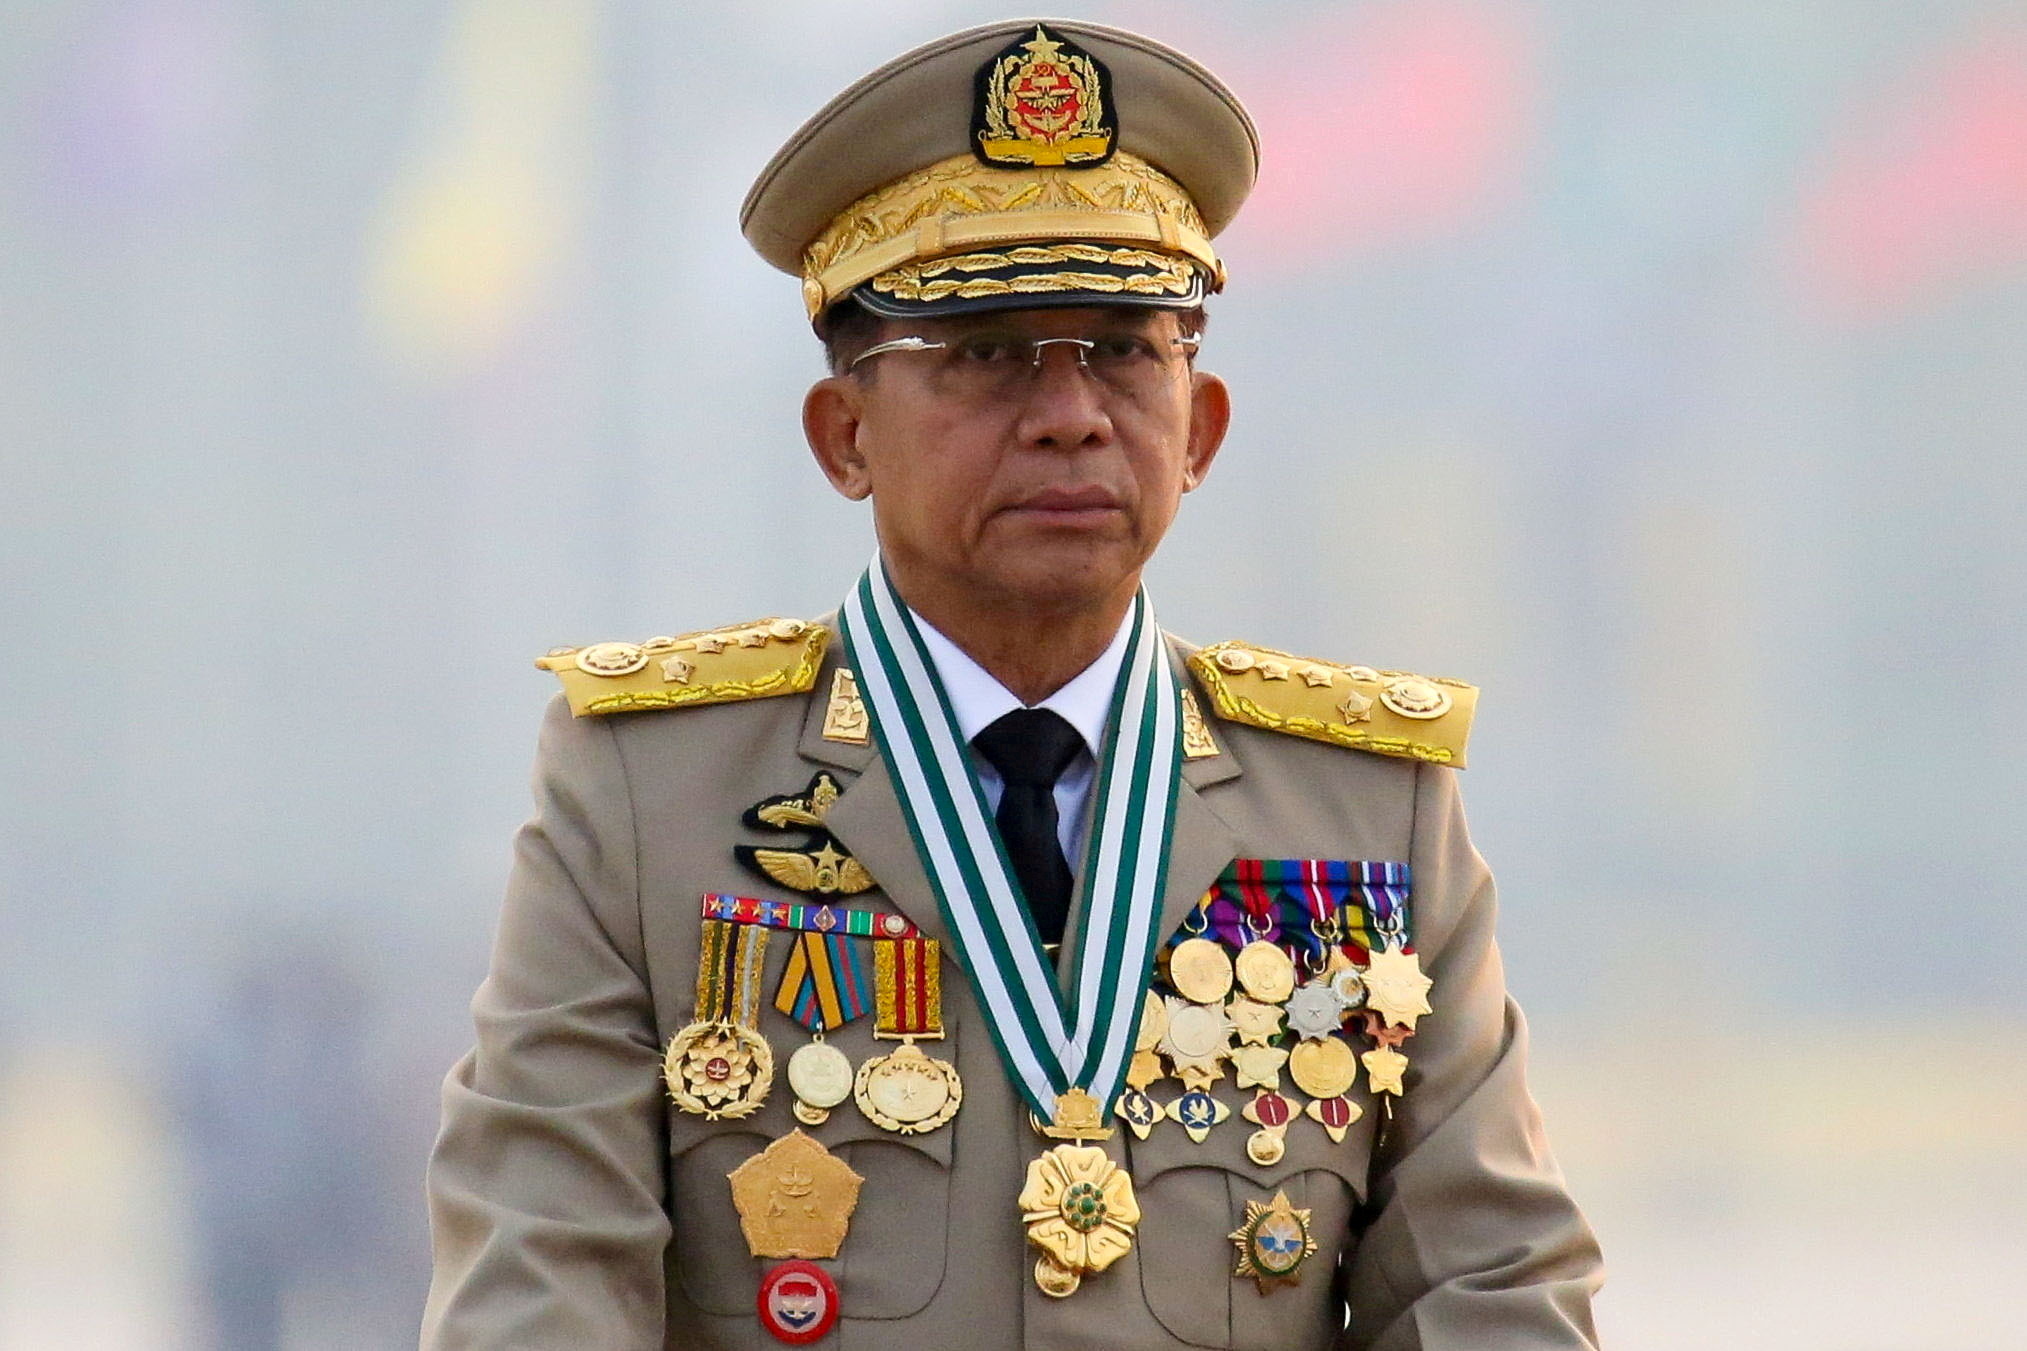 Myanmar's junta chief Senior General Min Aung Hlaing, who ousted the elected government in a coup on February 1, presides at an army parade on Armed Forces Day in Naypyitaw, Myanmar, March 27, 2021. REUTERS/Stringer/File Photo